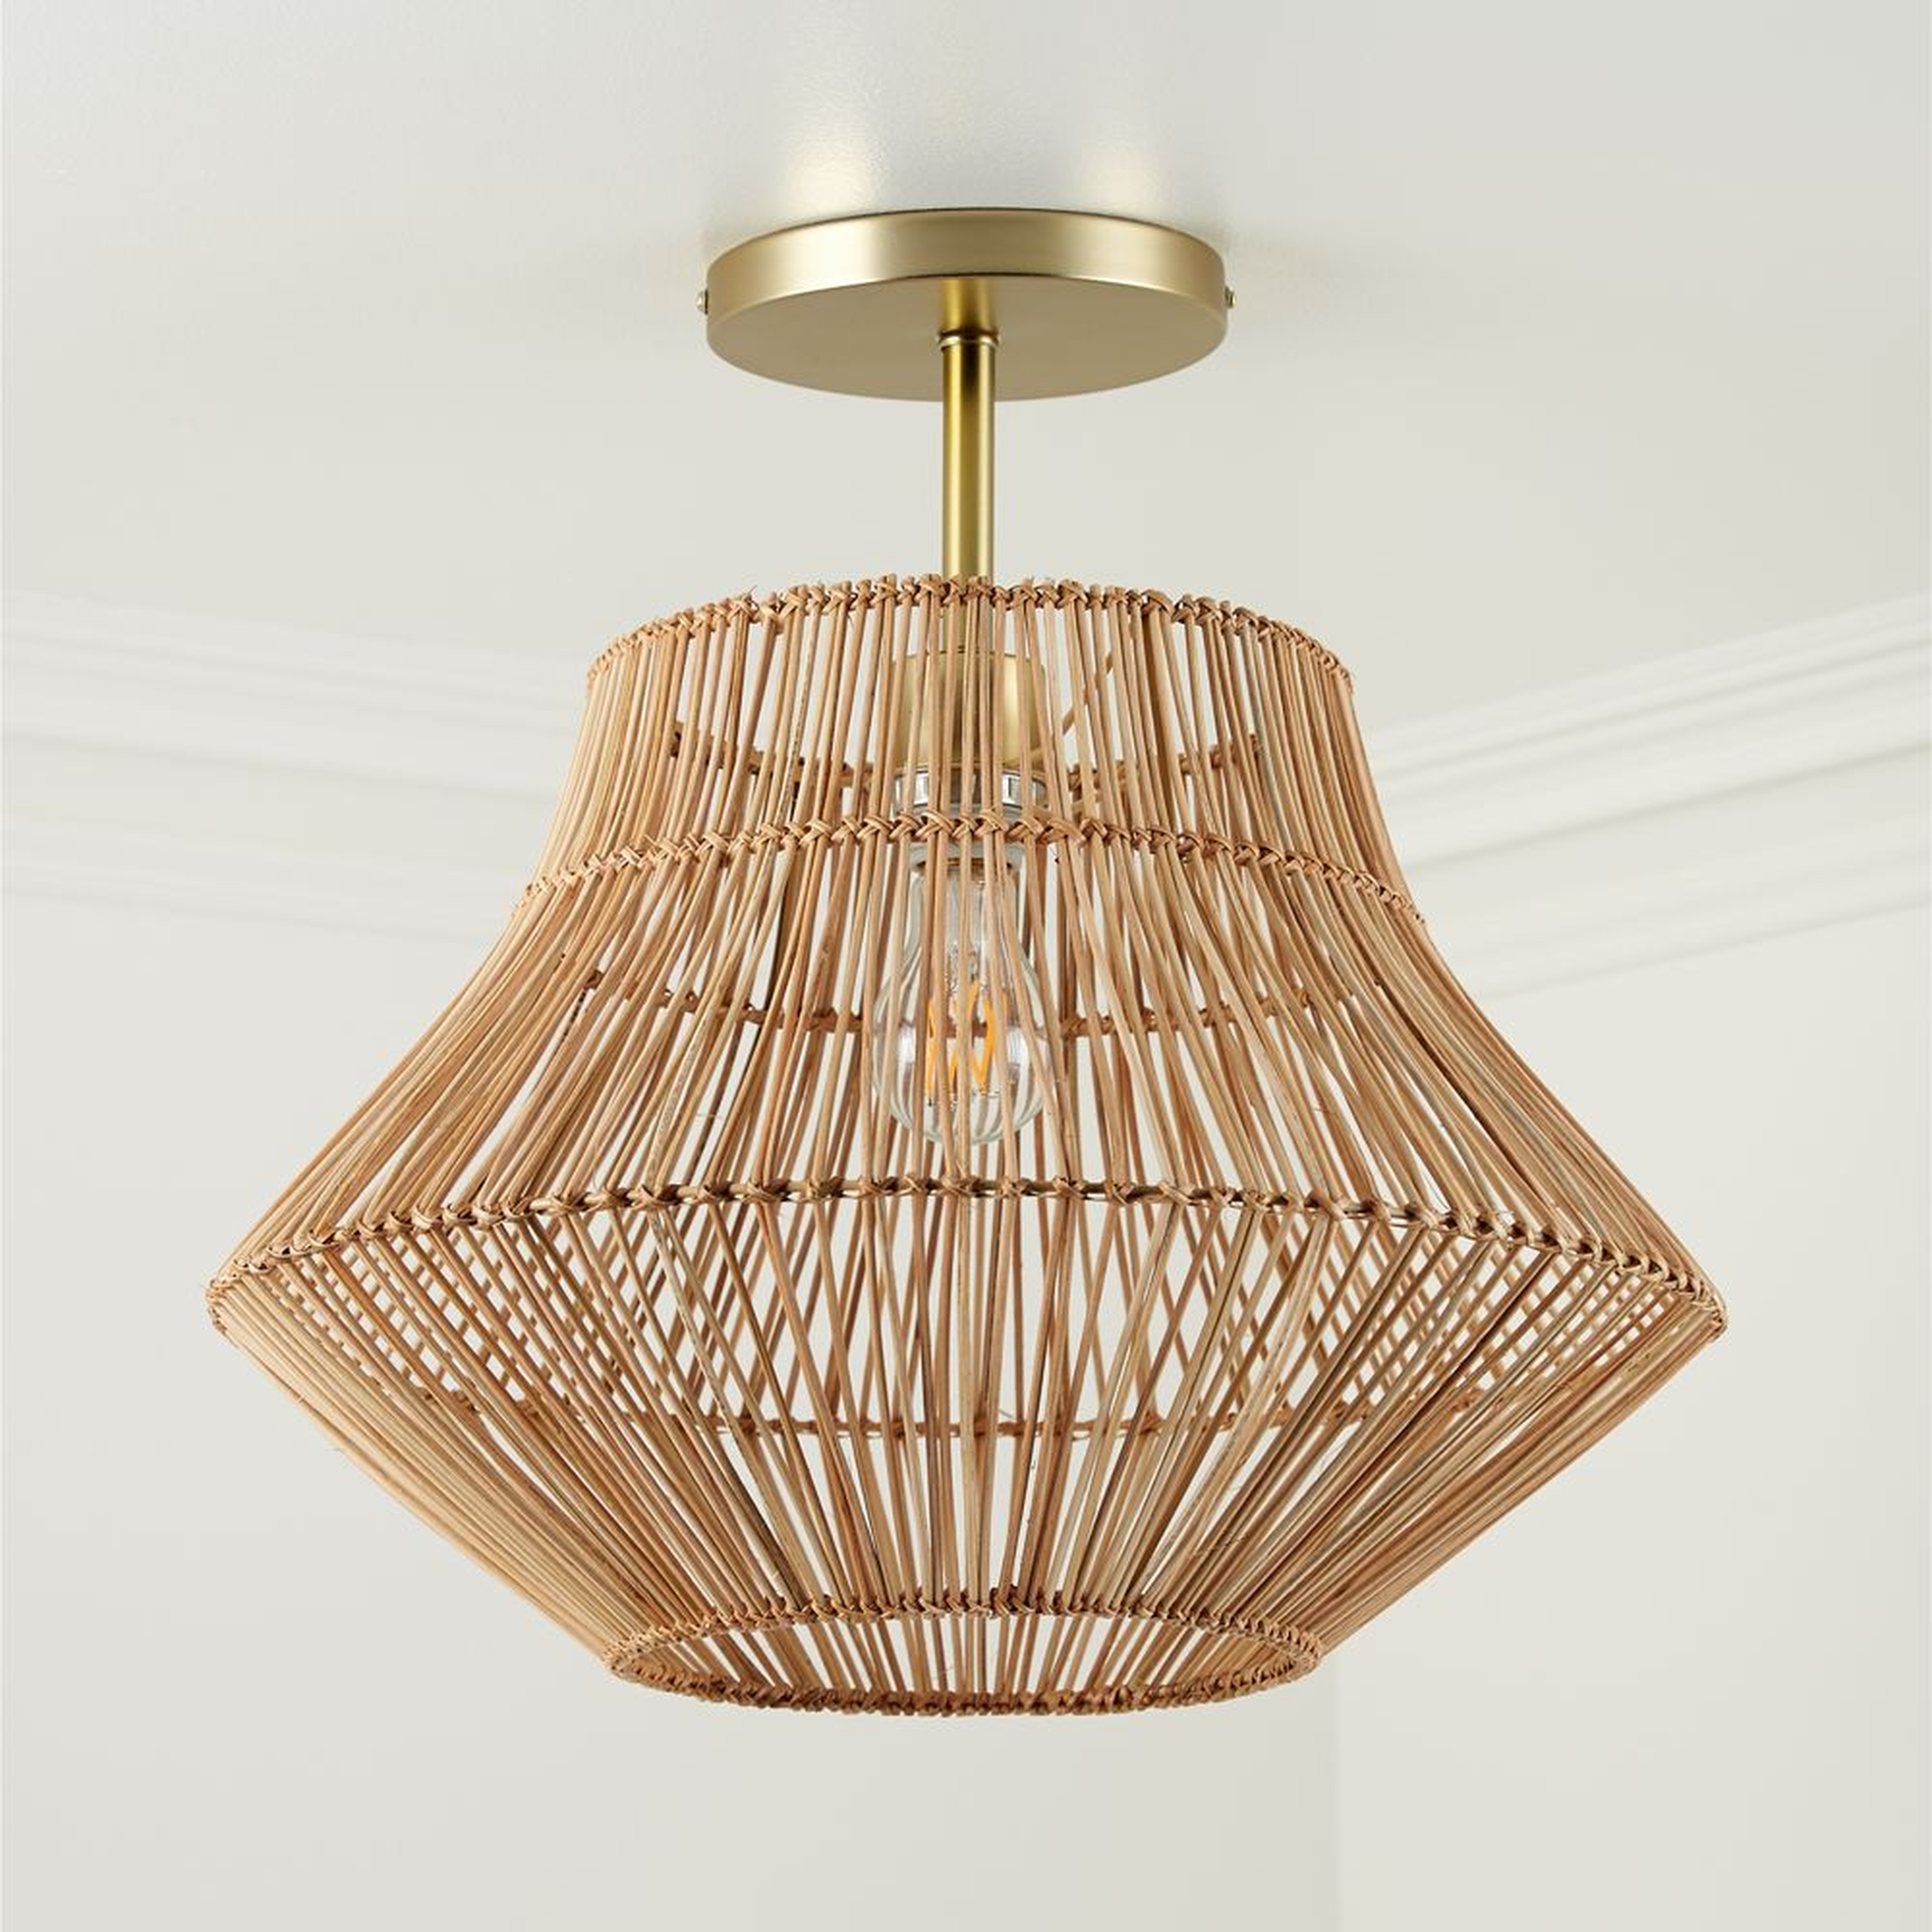 Rattan Ceiling Light - Crate and Barrel